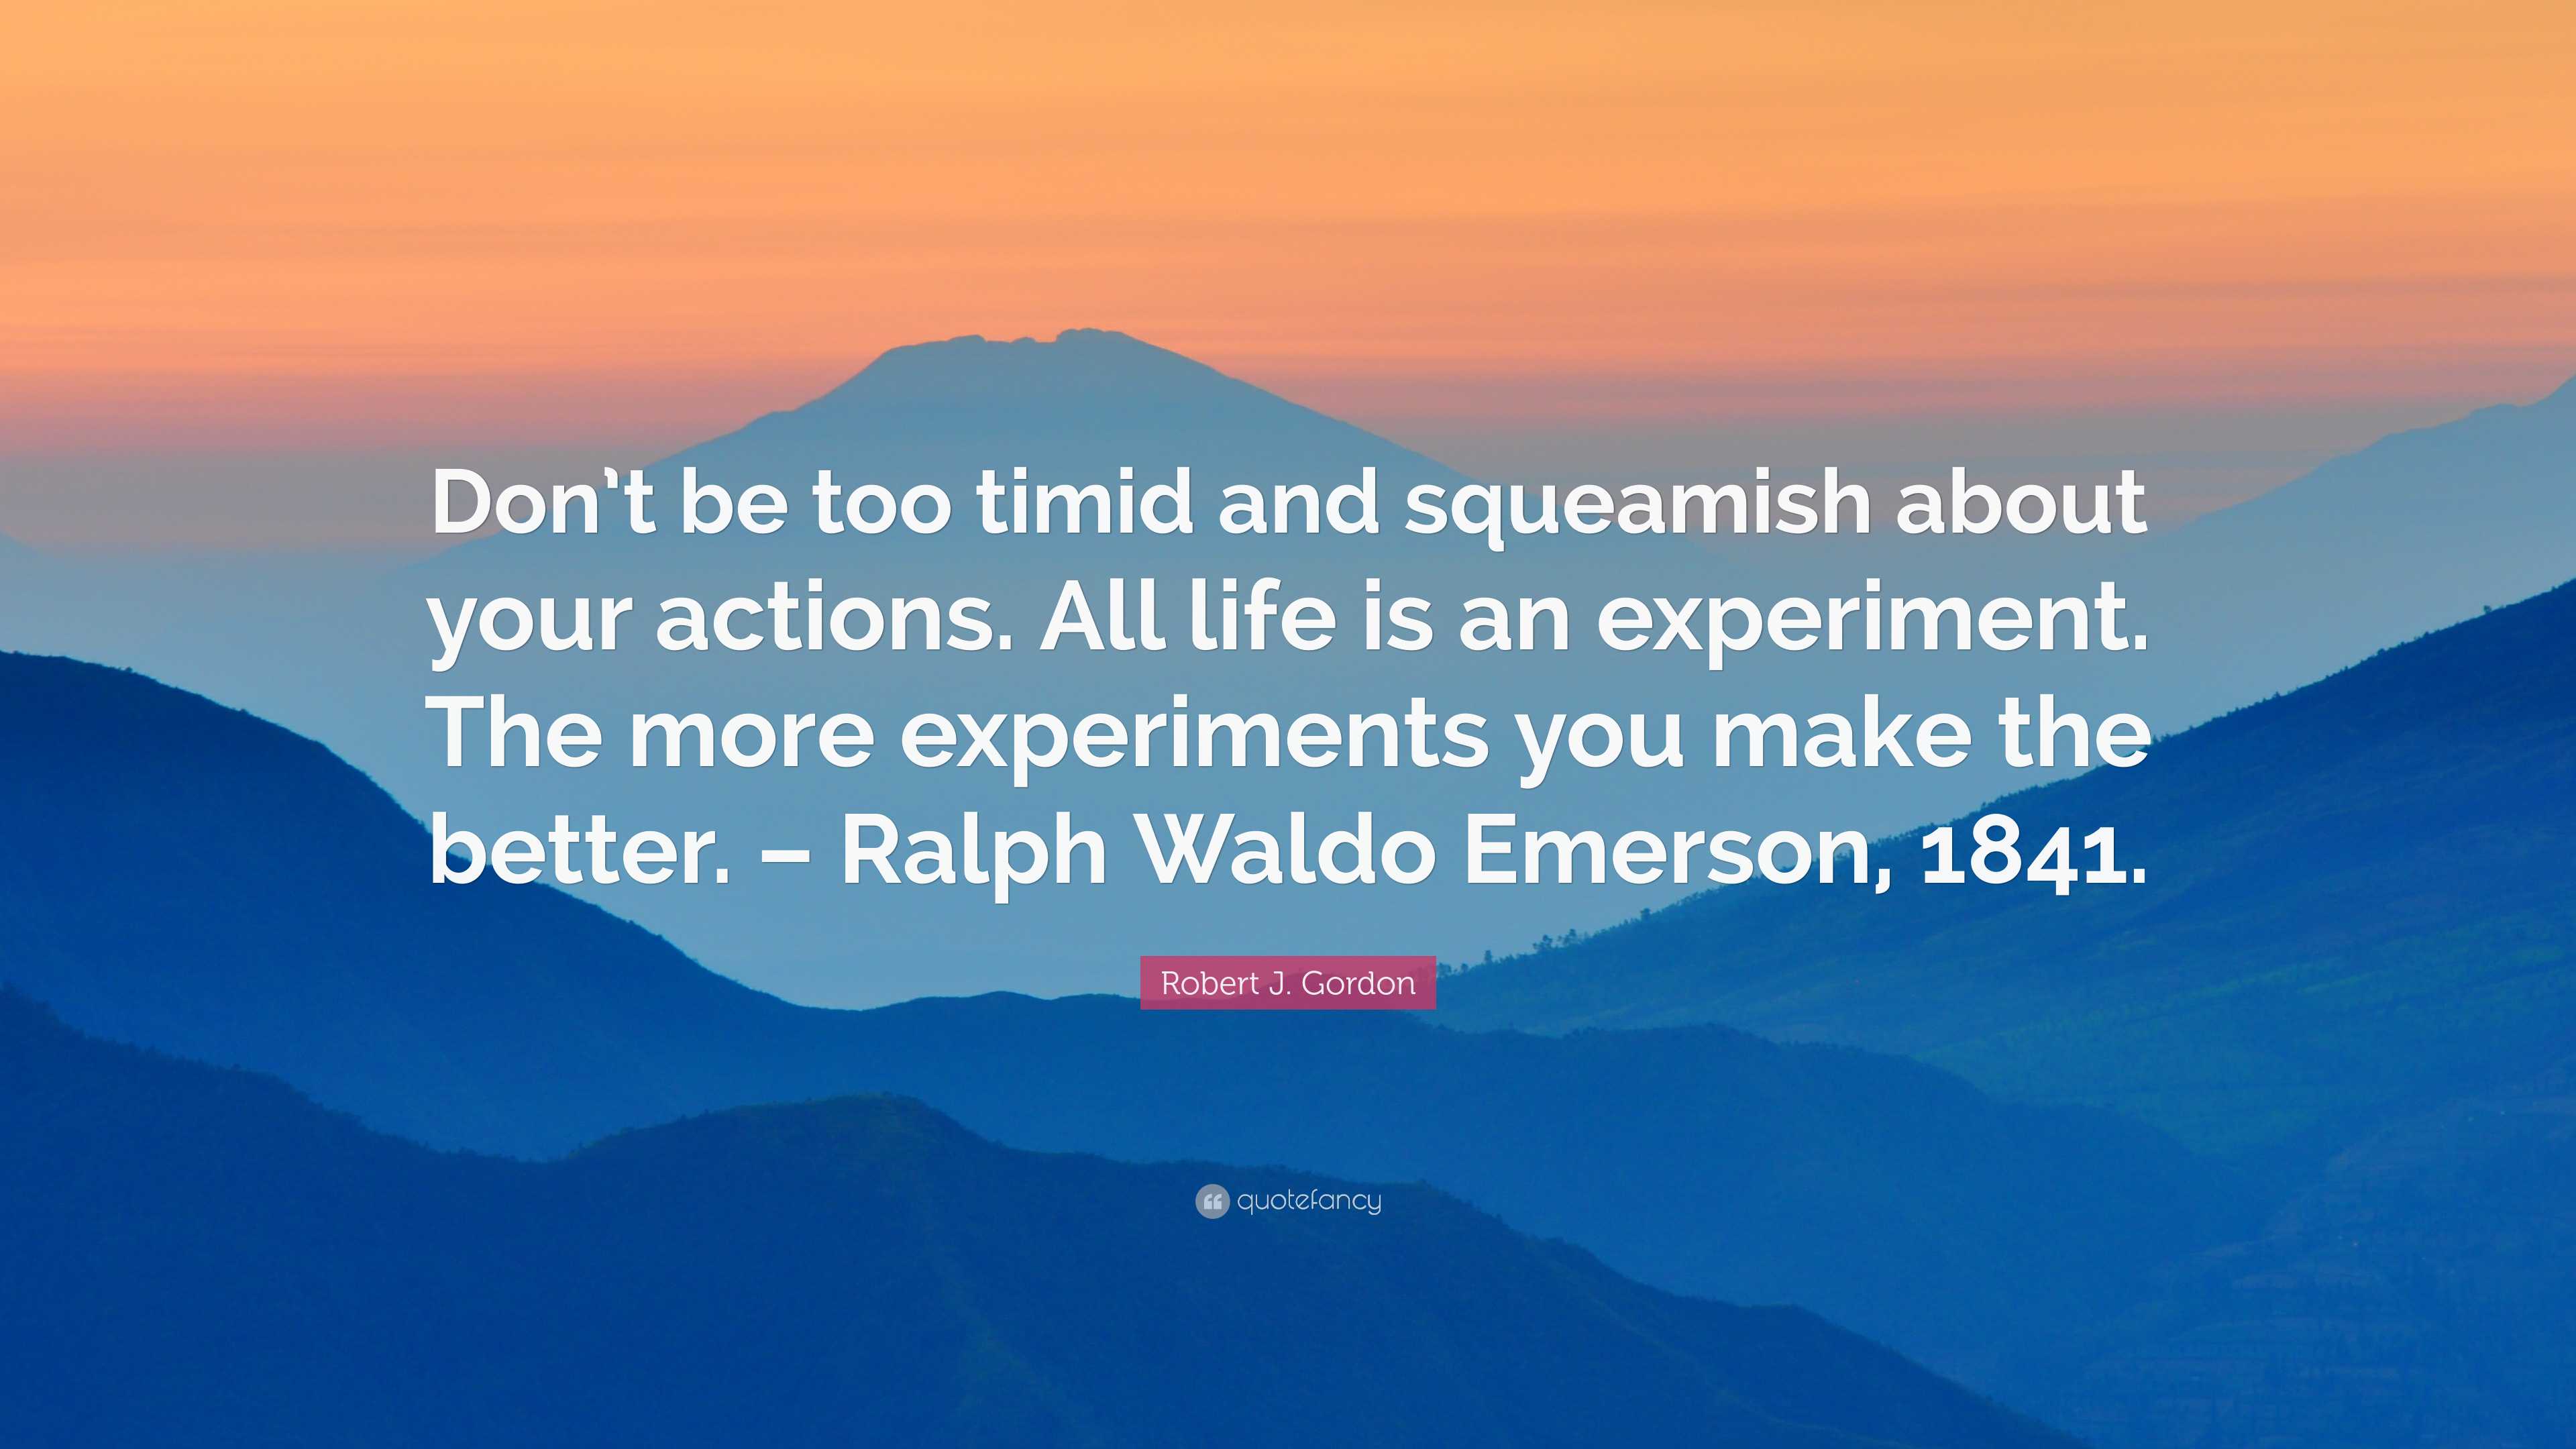 Robert J. Gordon Quote: “Don’t be too timid and squeamish about your ...